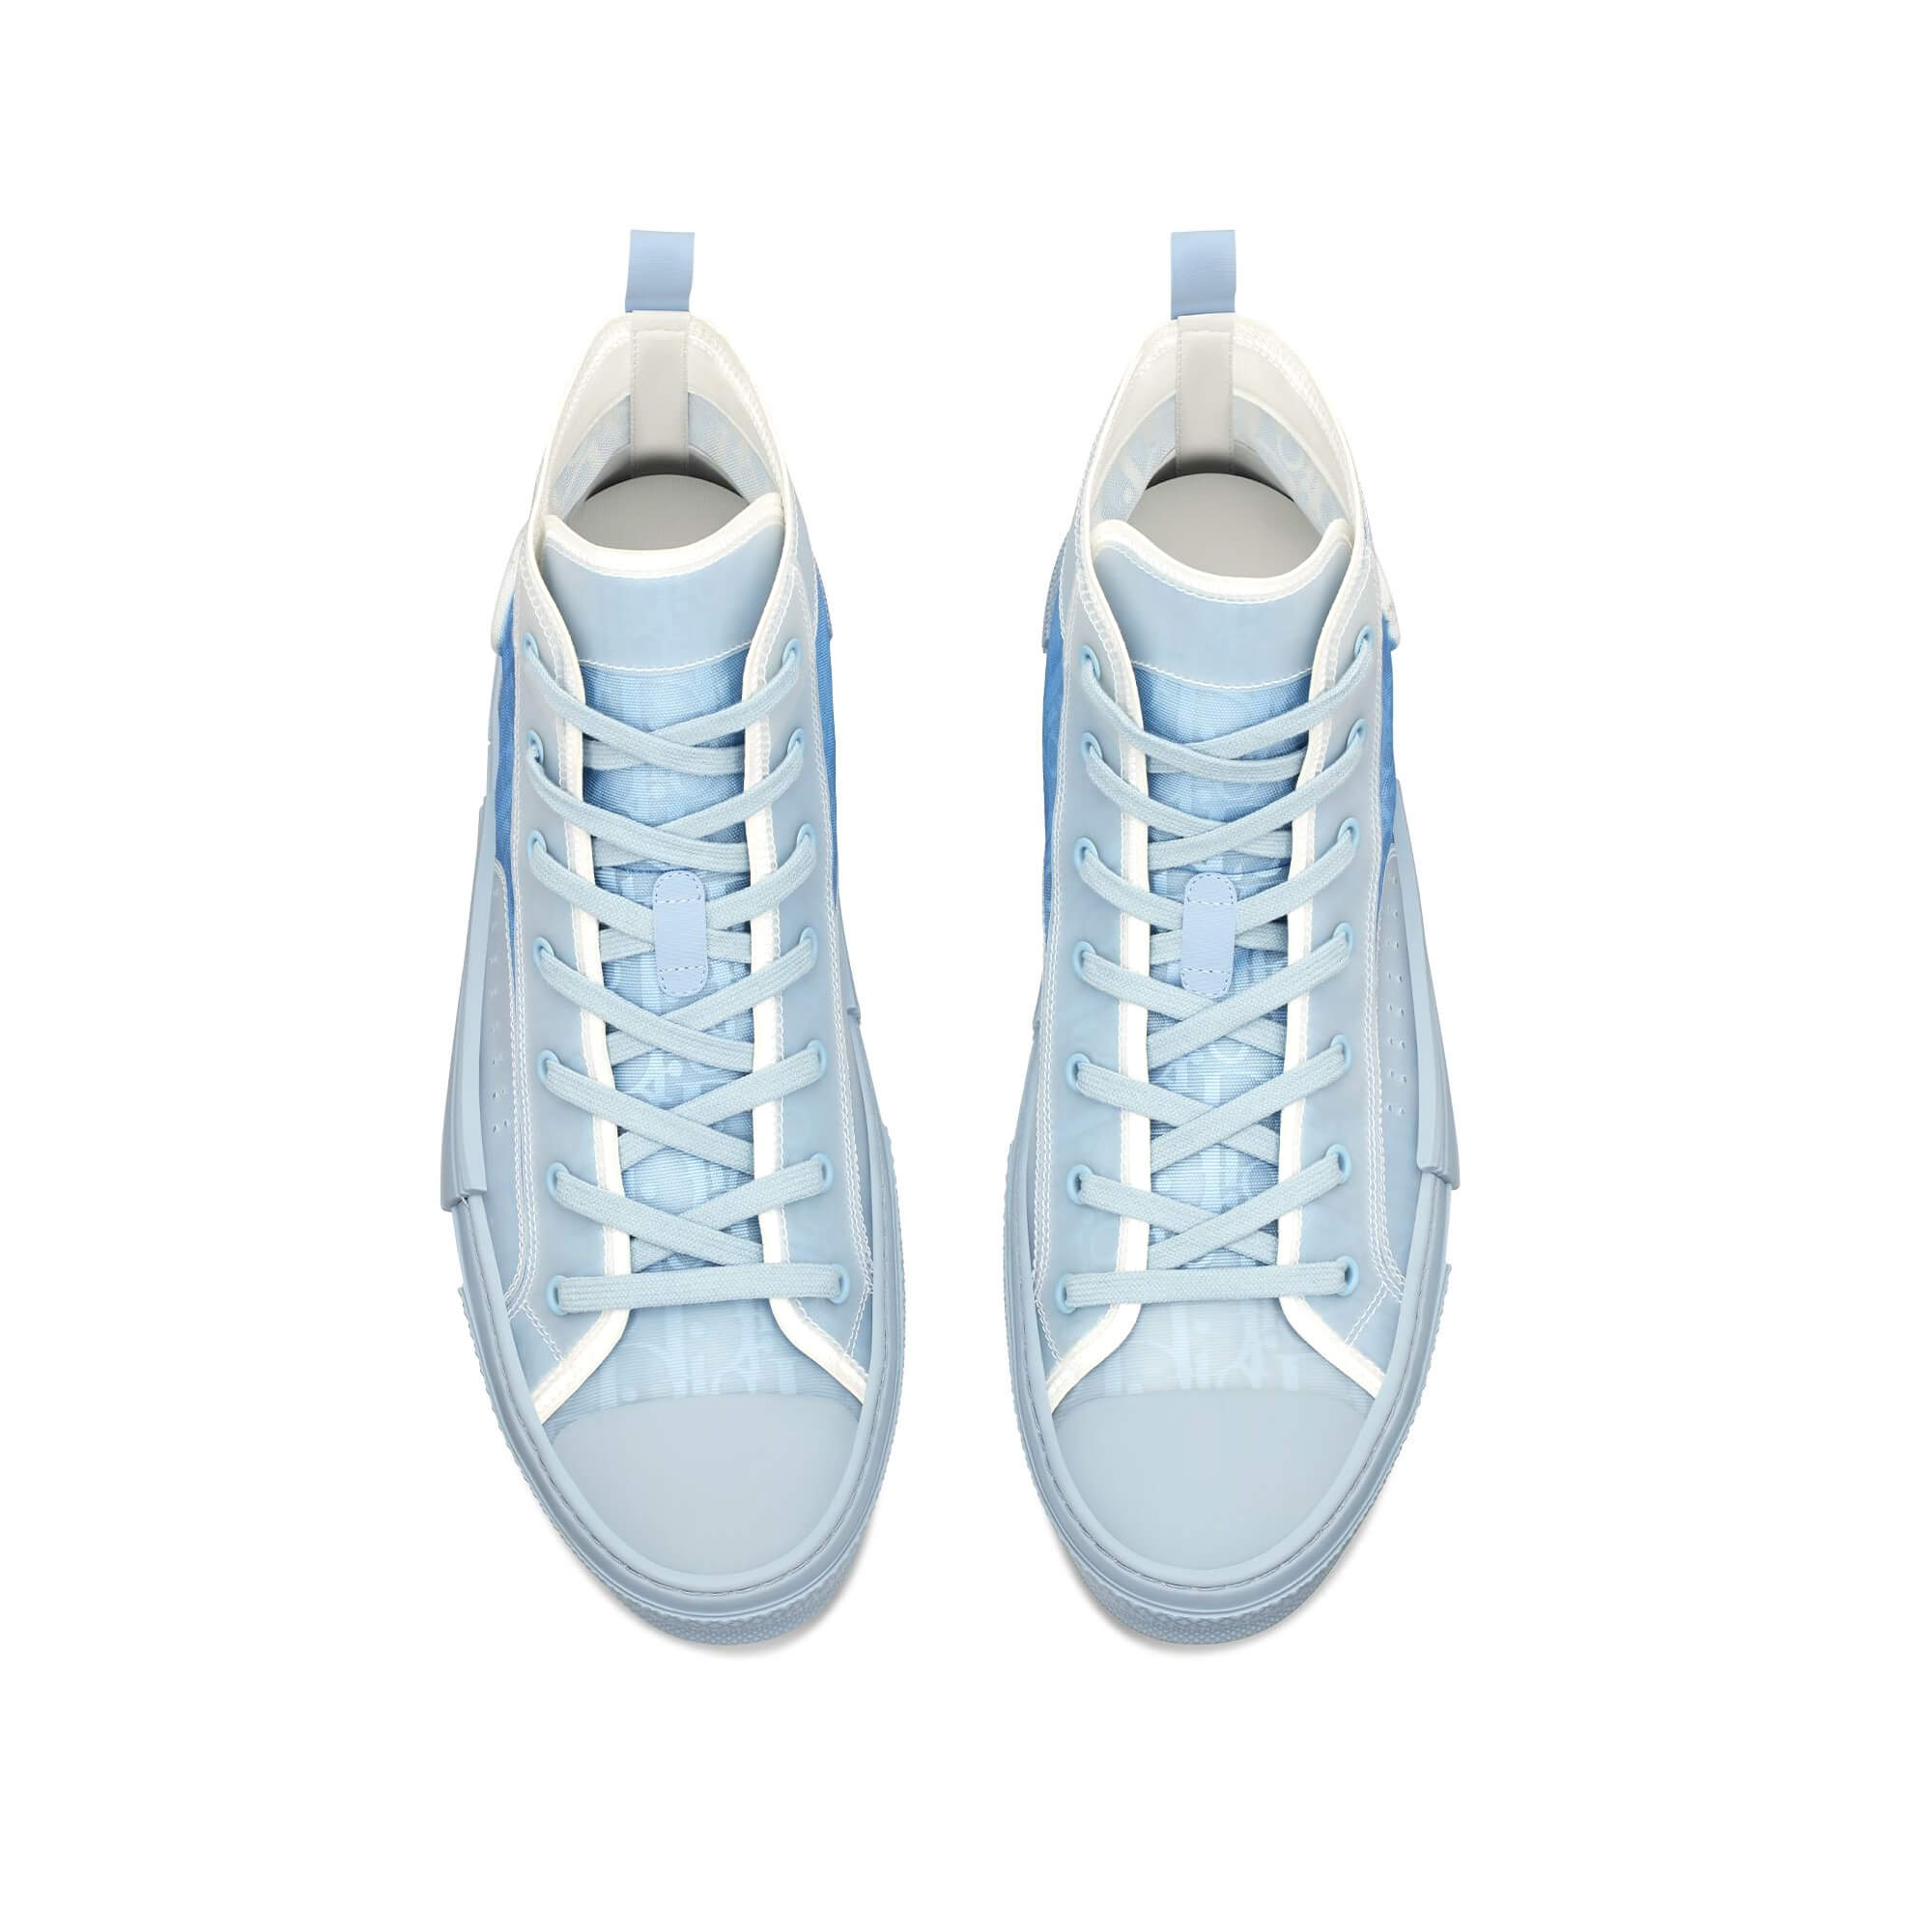 Dior homme B22 light blue white  Adamsneakers